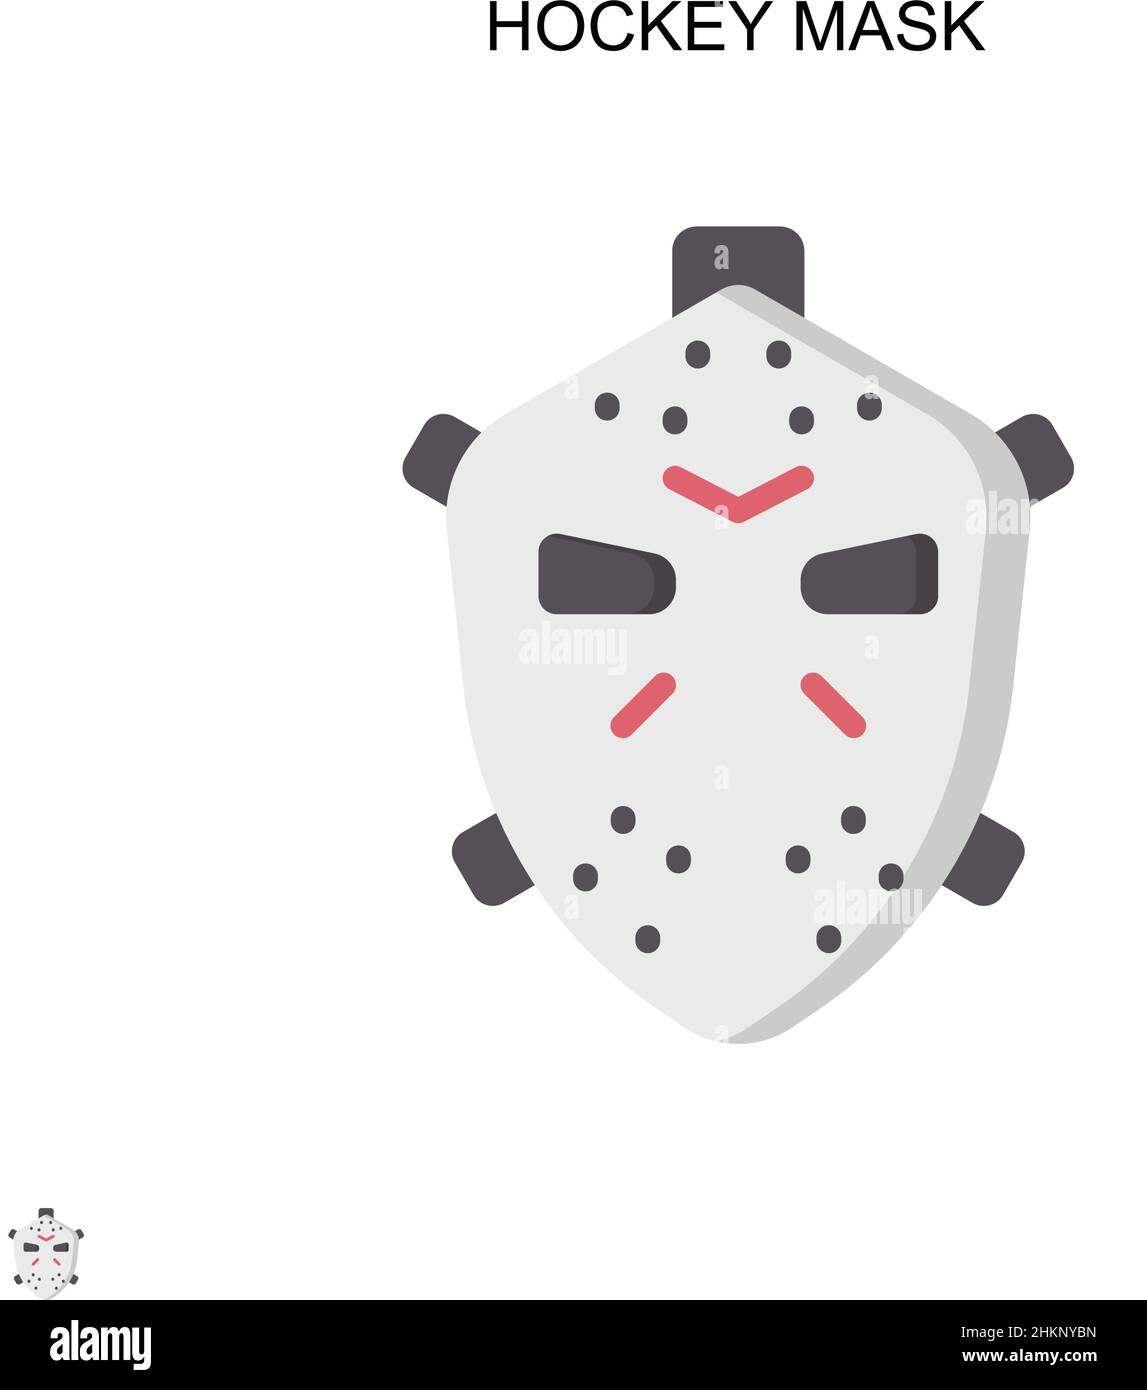 Outline hockey mask icon isolated black simple Vector Image